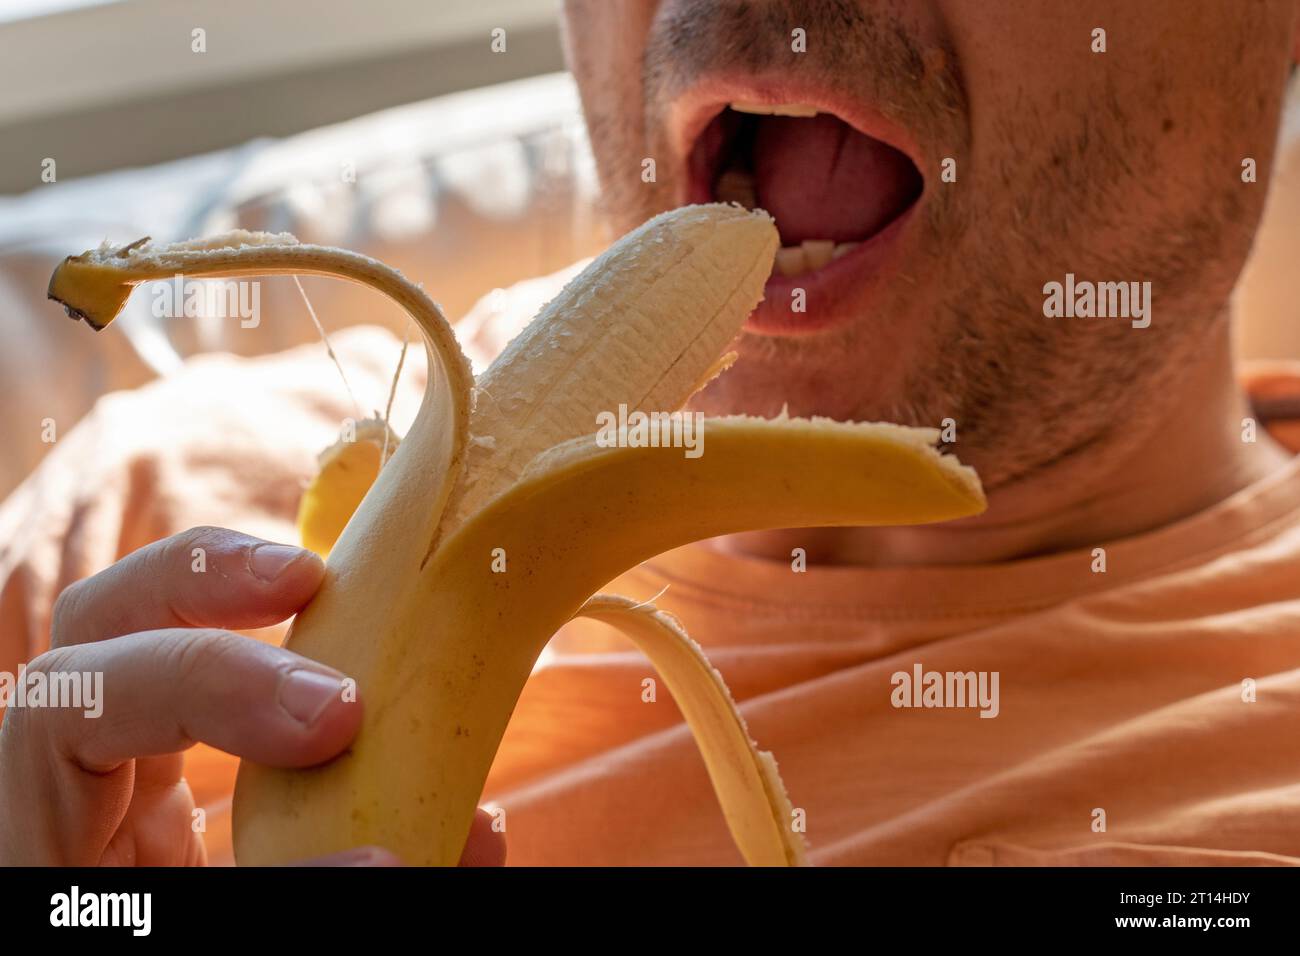 man holds a peeled banana before eating it with his mouth open Stock Photo